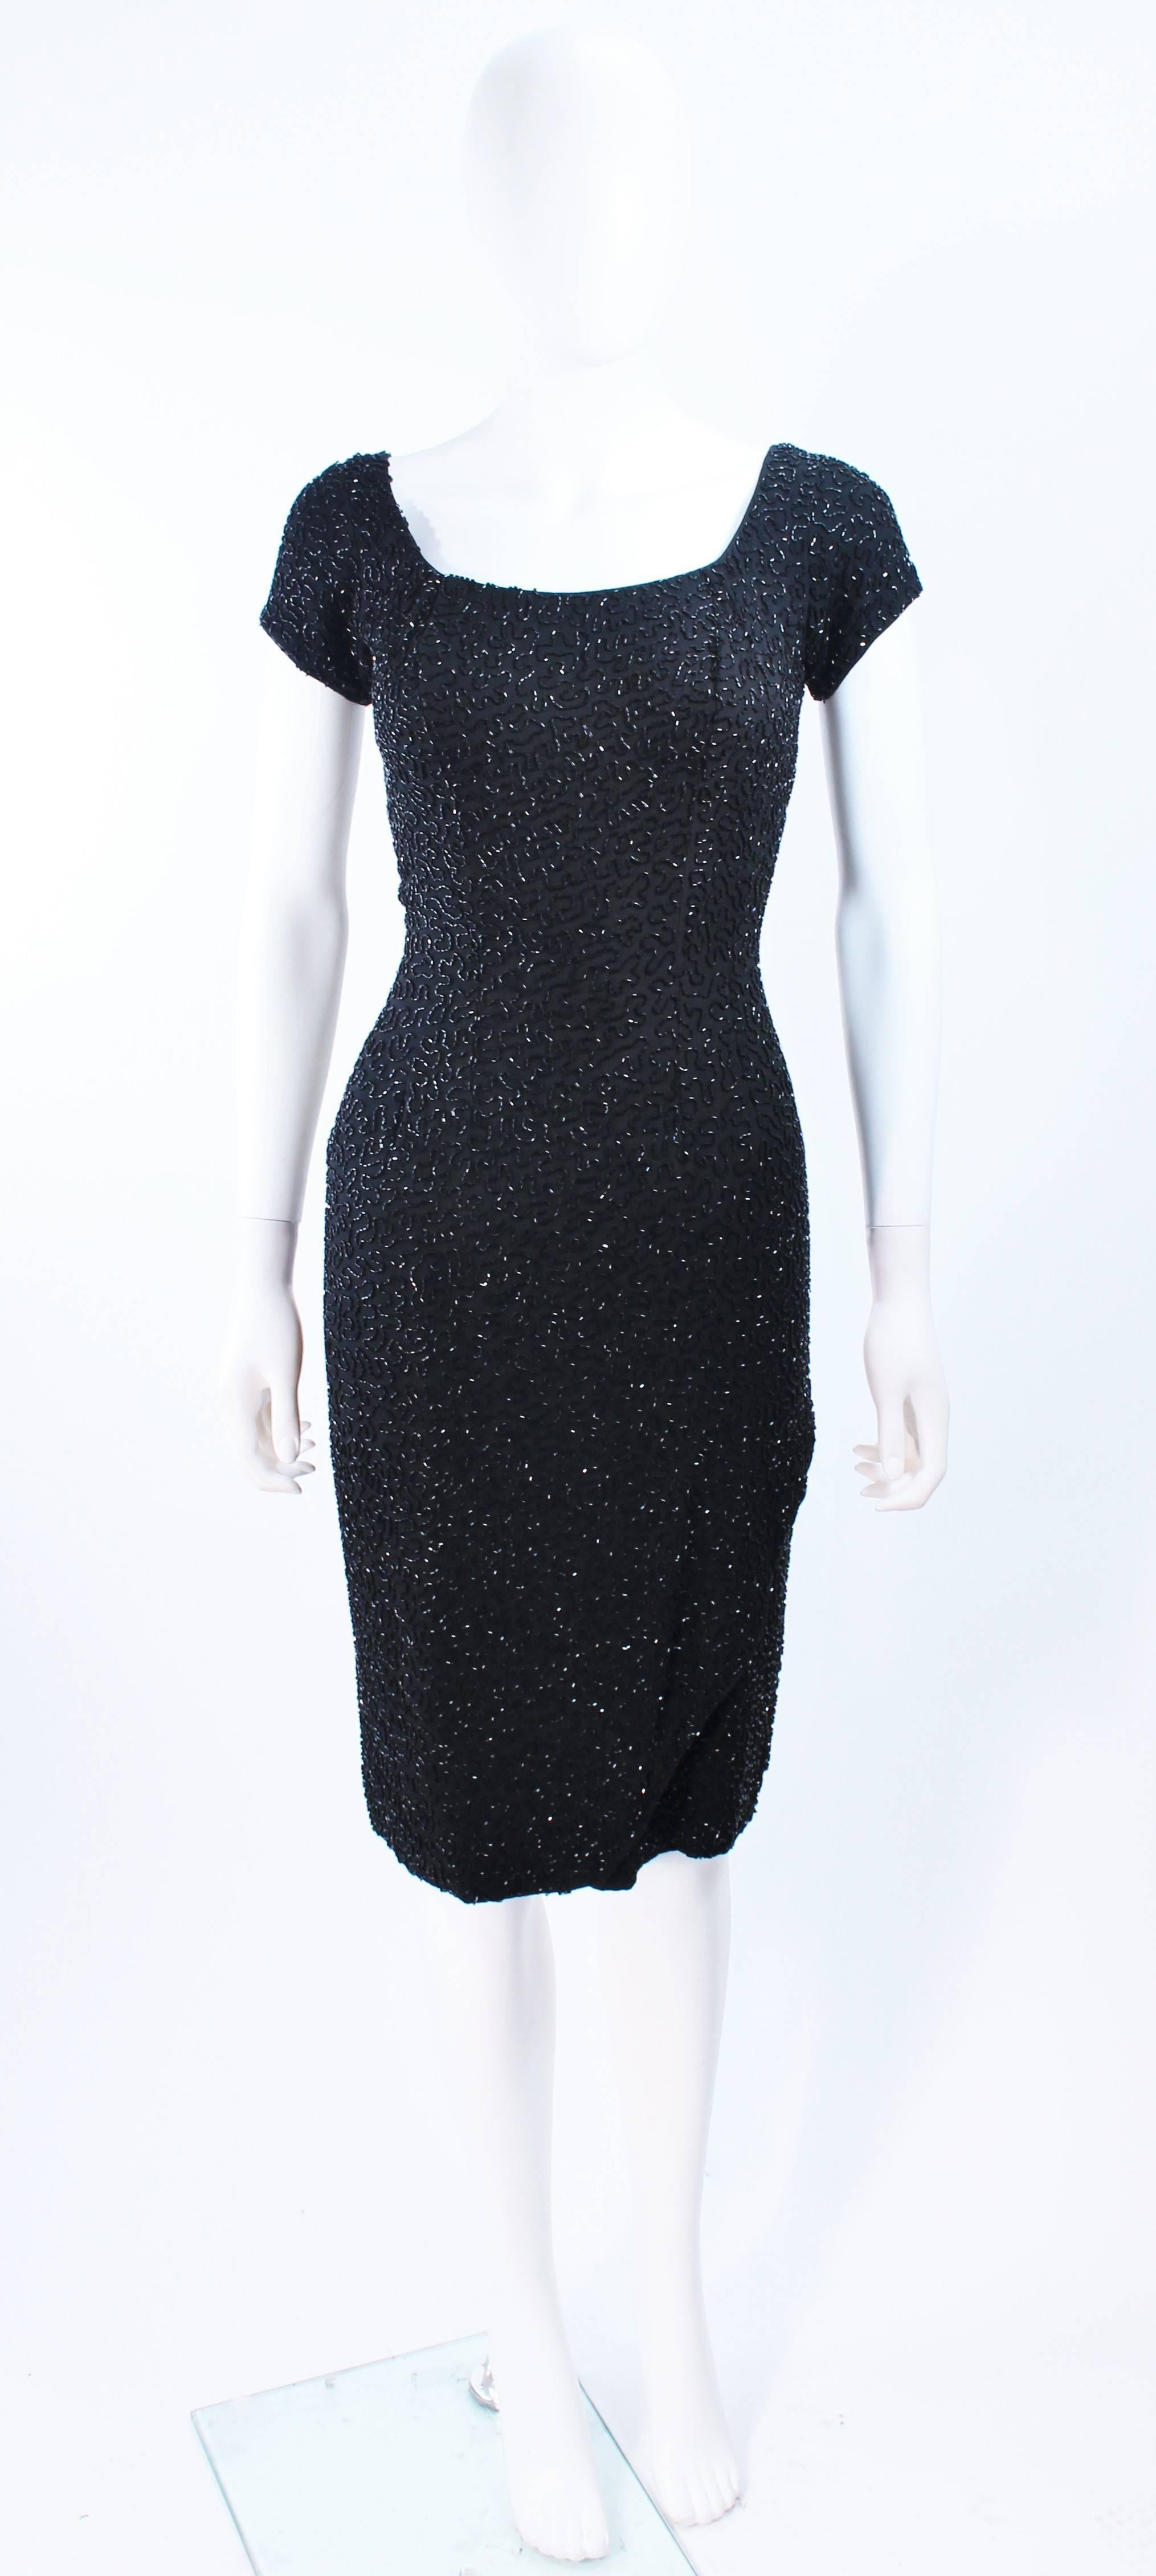 This Ceil Chapman cocktail dress is composed of a hand beaded black silk. Features a center back draped style and a zipper closure. In excellent vintage condition.

**Please cross-reference measurements for personal accuracy. Size in description